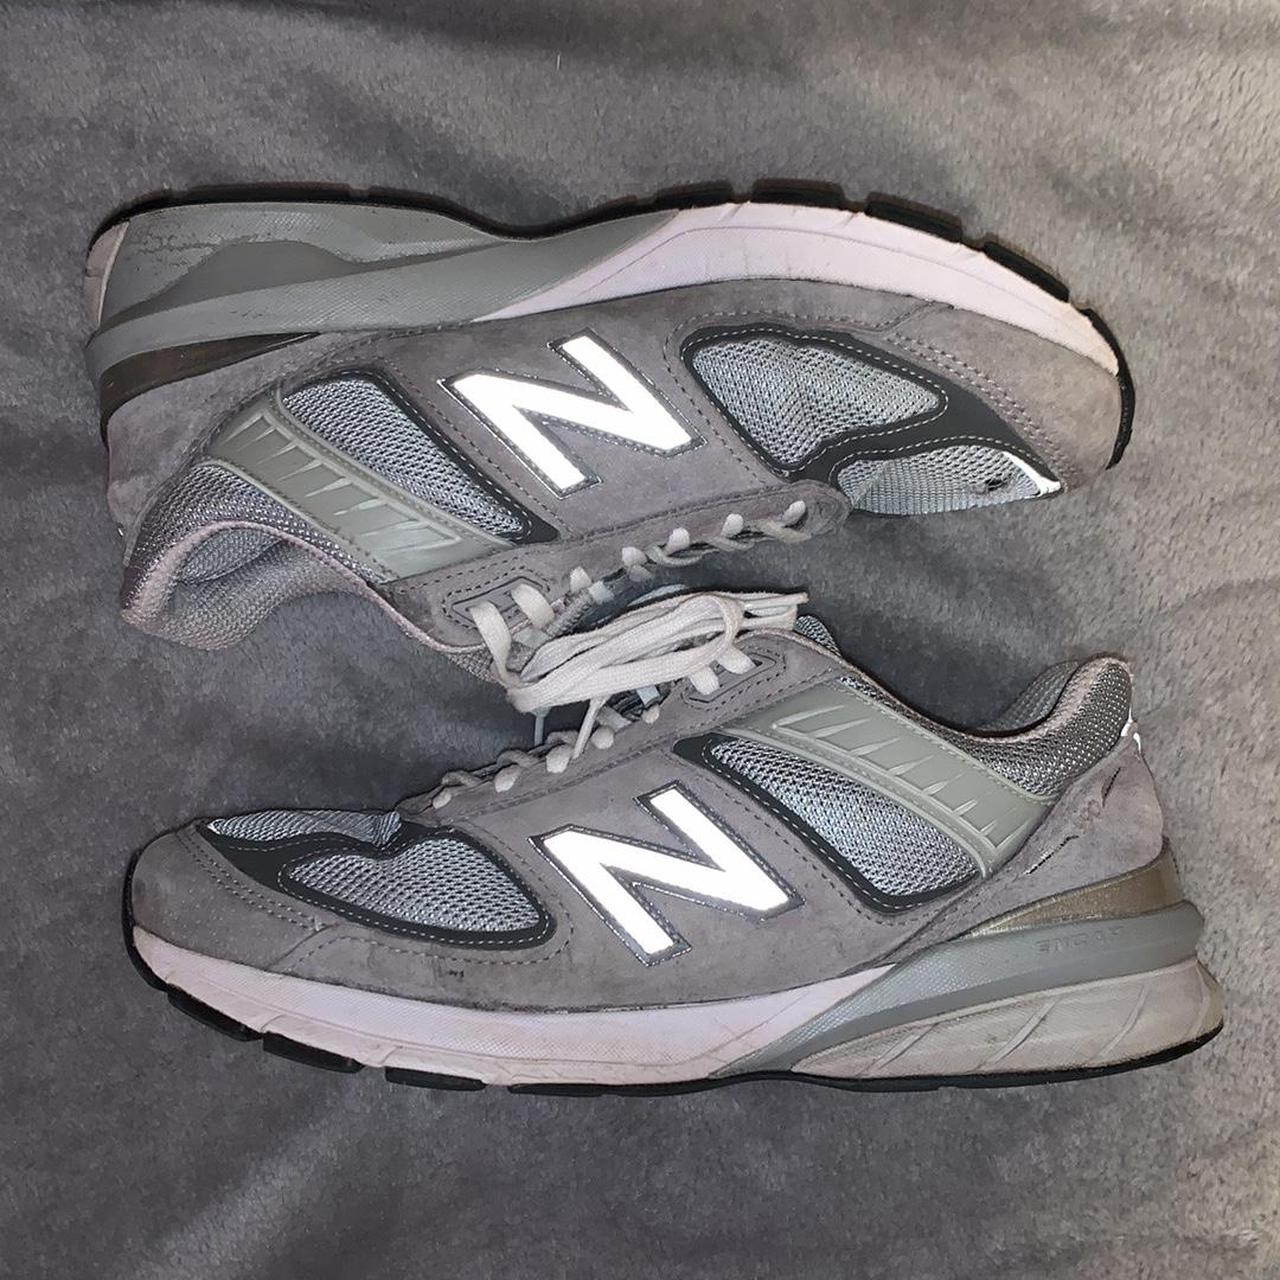 New Balance Men's Grey and White Trainers | Depop